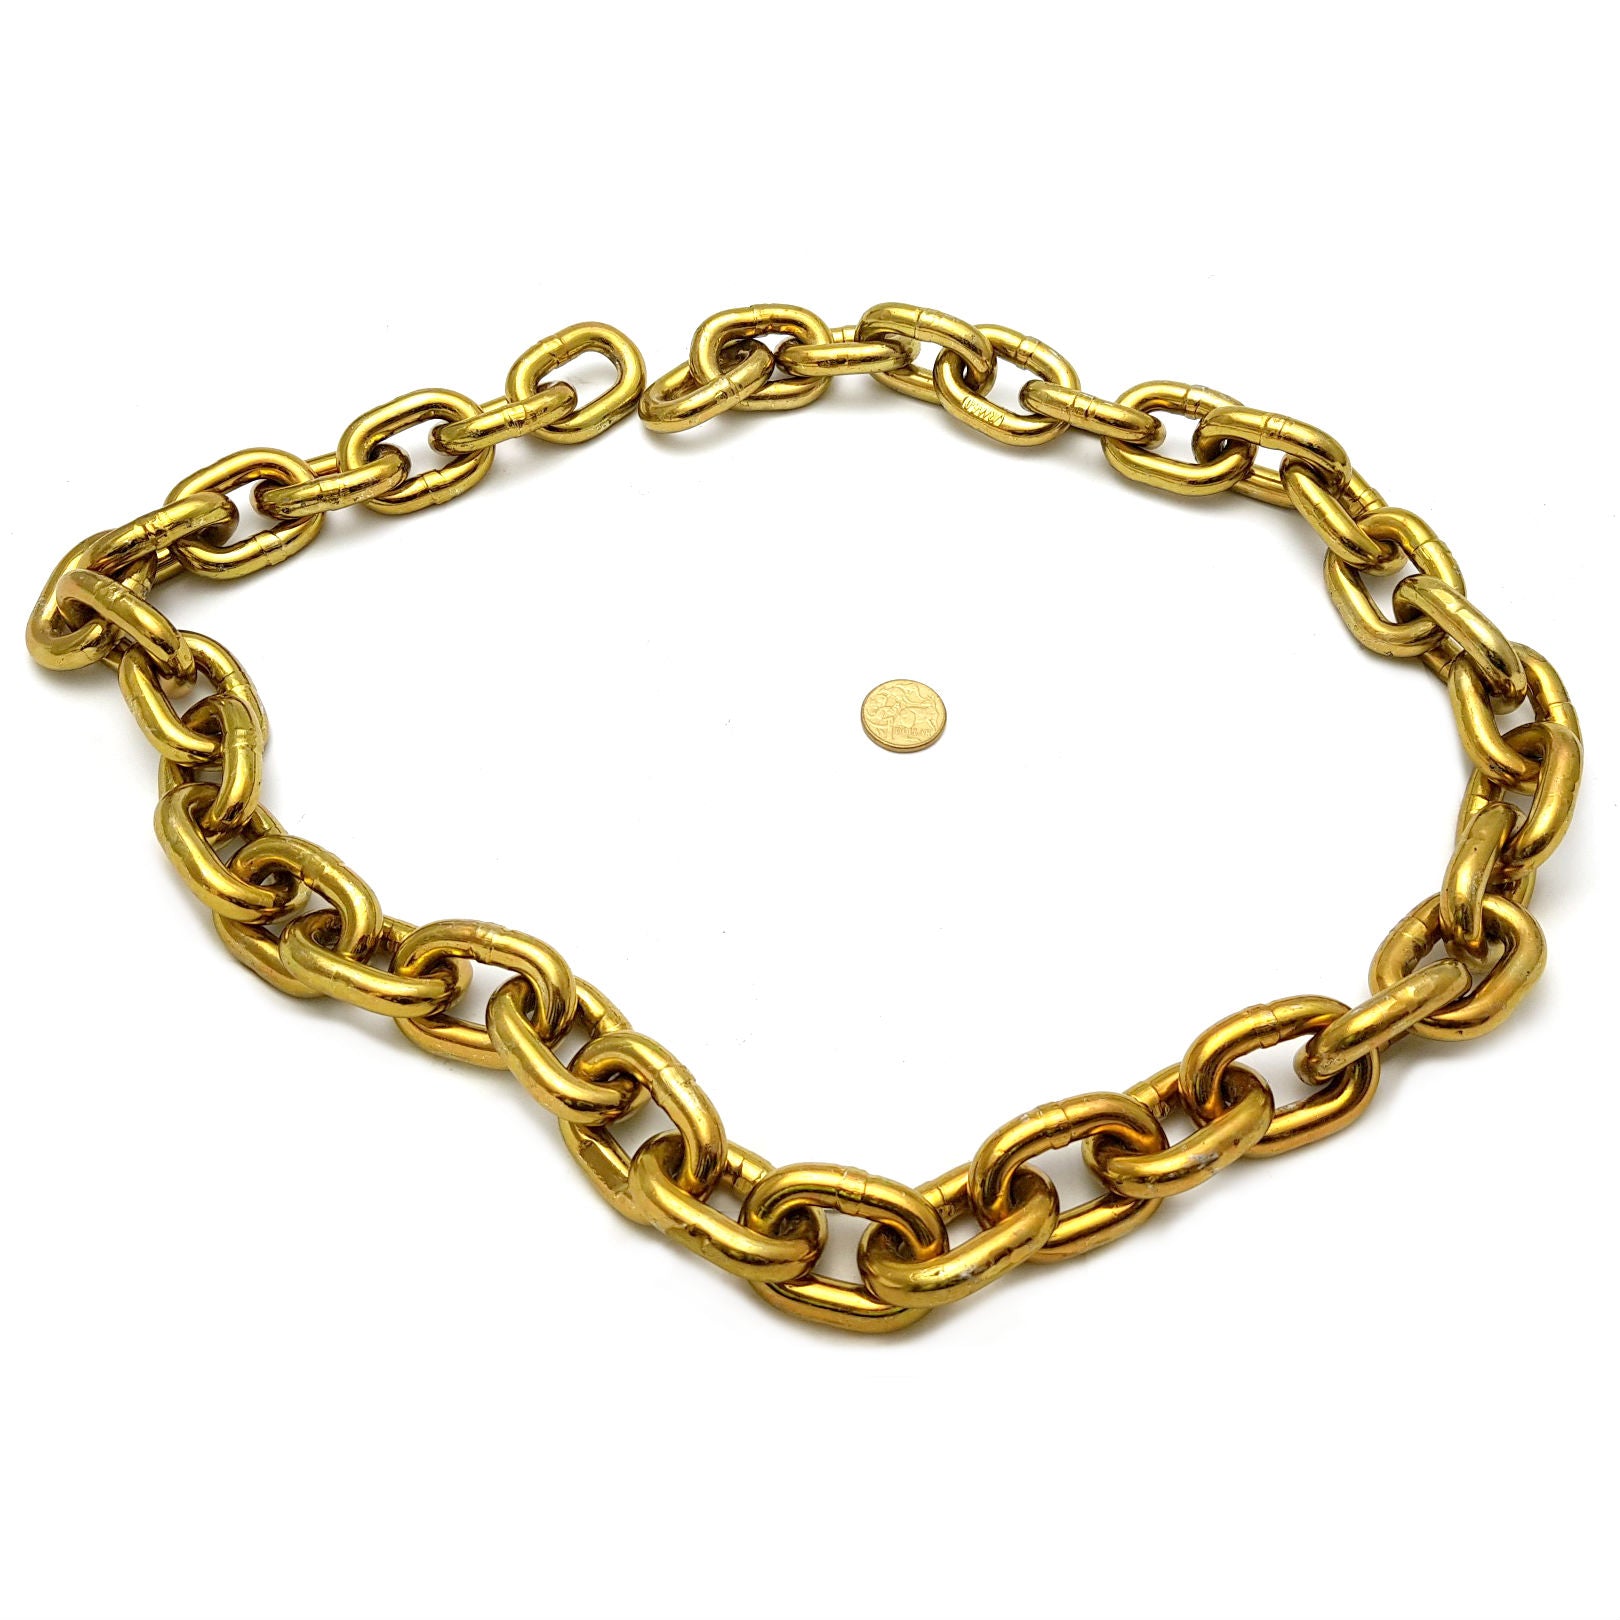 Hardened security chain, size: 10mm, order 1 metre. Australia wide delivery